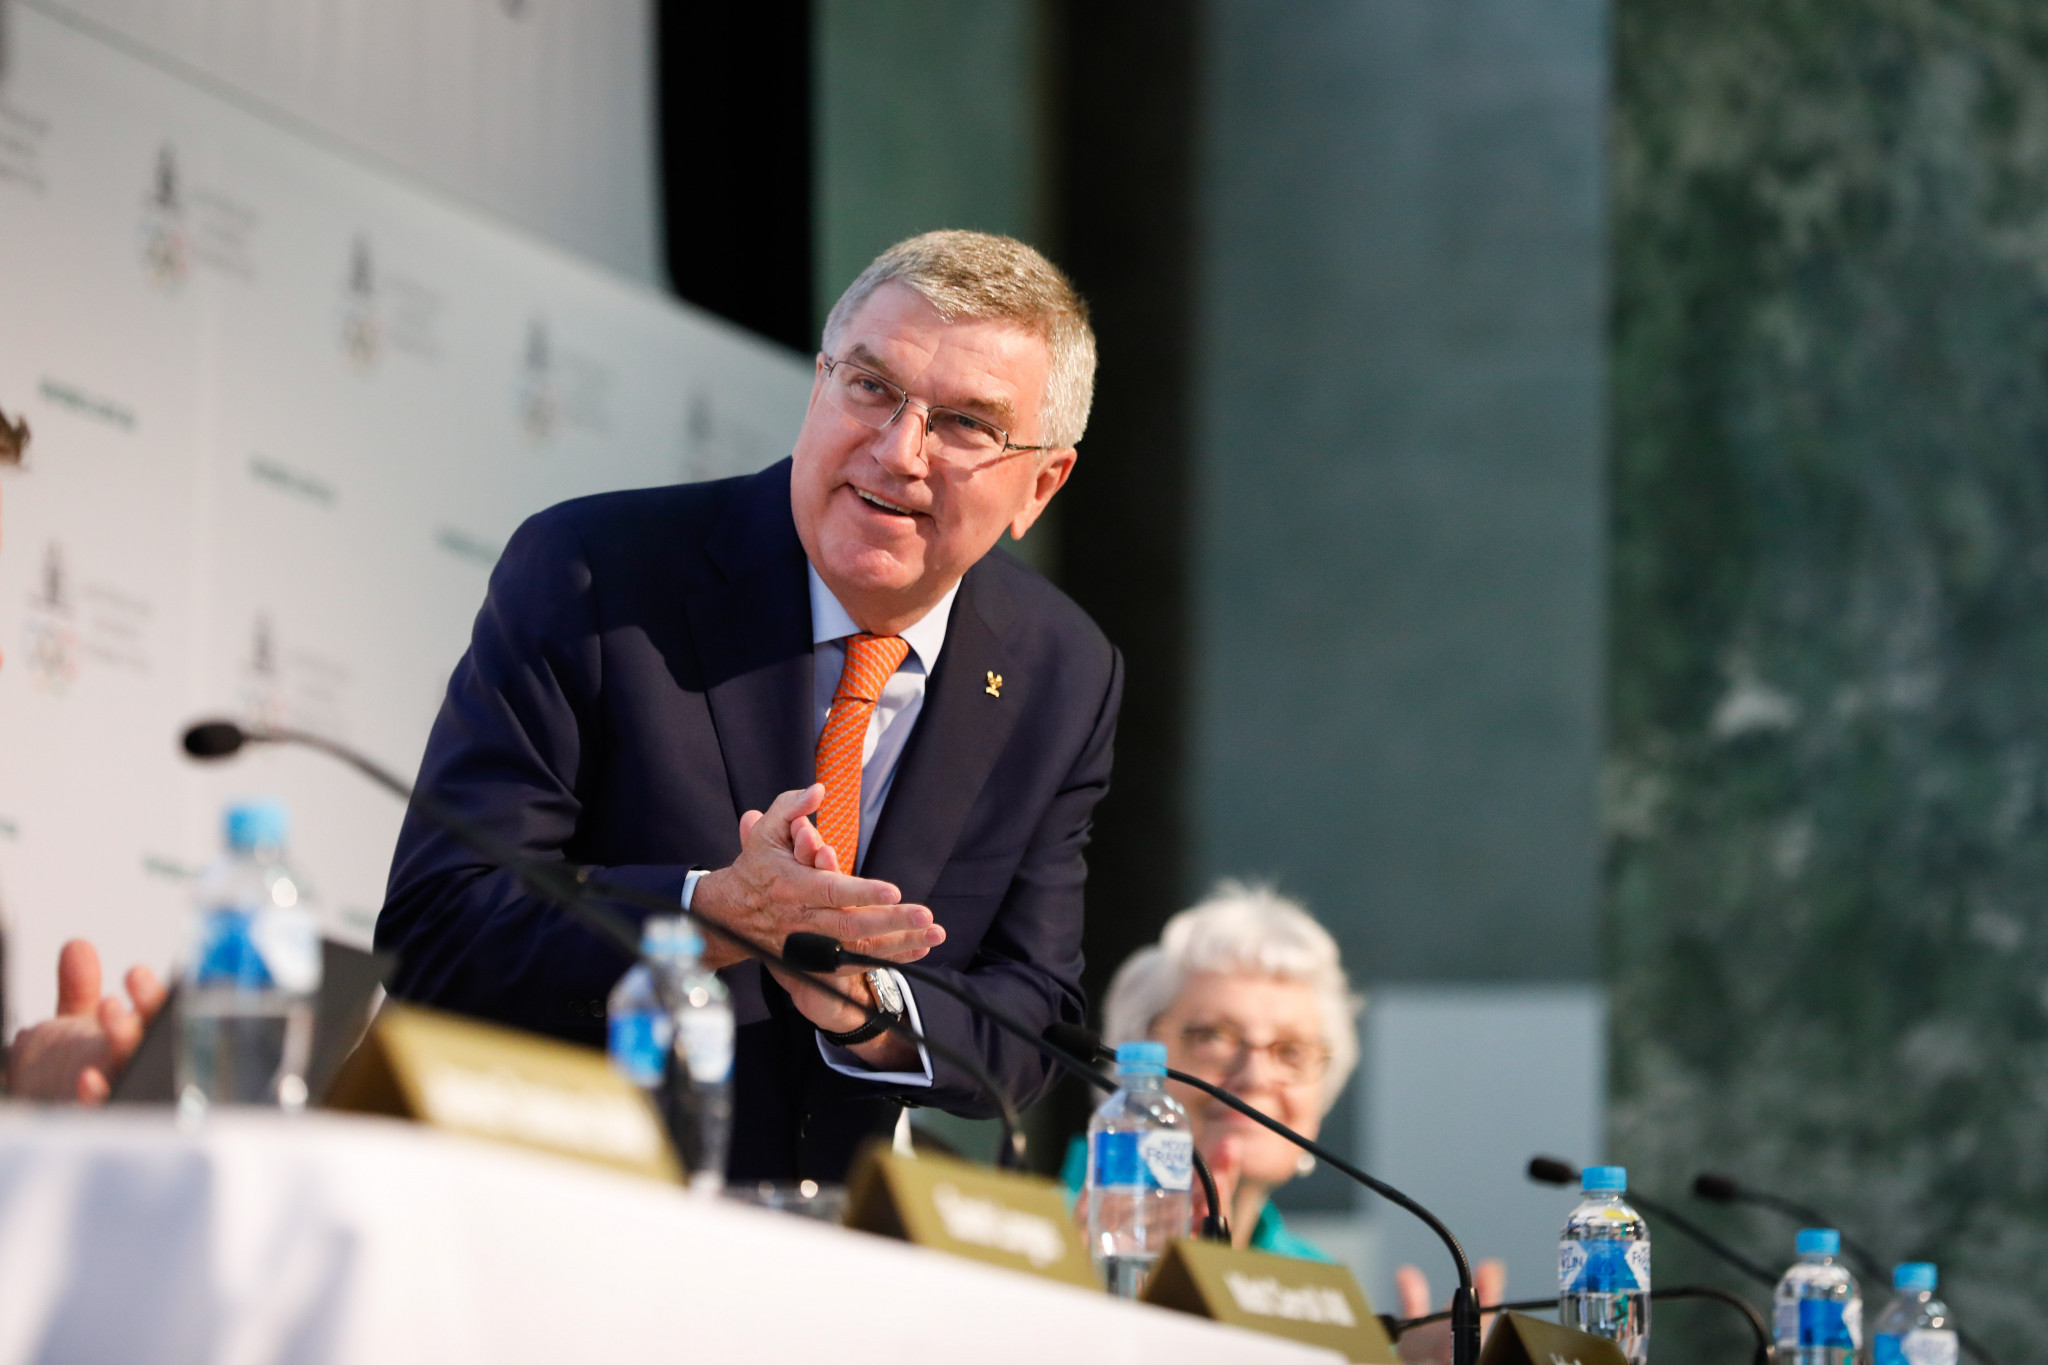 International Olympic Committee President Thomas Bach has praised Tokyo 2020's preparations for the Olympic and Paralympic Games ©Getty Images